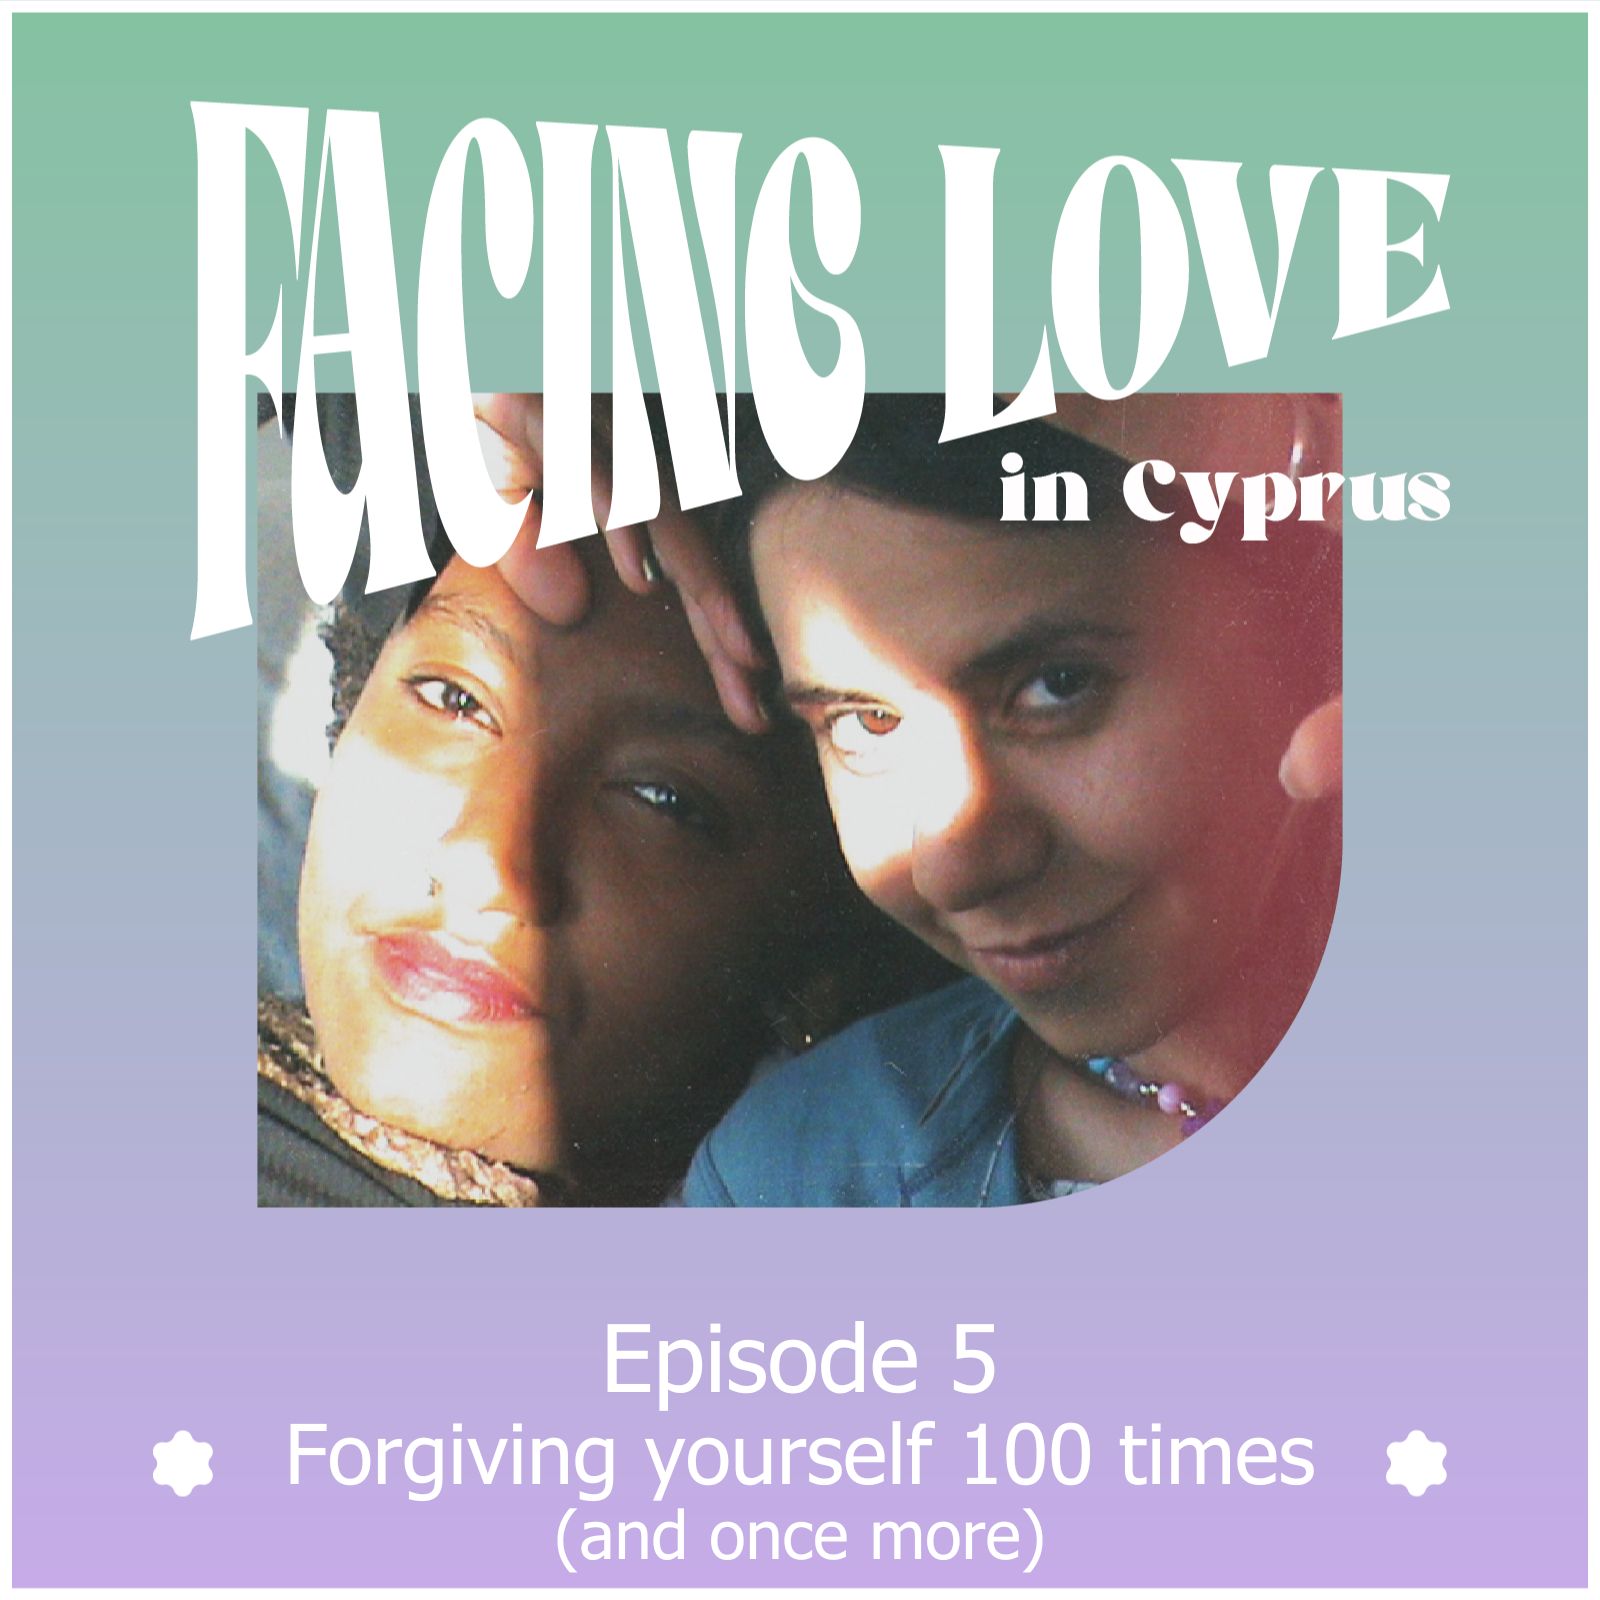 Facing Love in Cyprus – Episode 5: Forgiving yourself 100 times (1/10/2023)